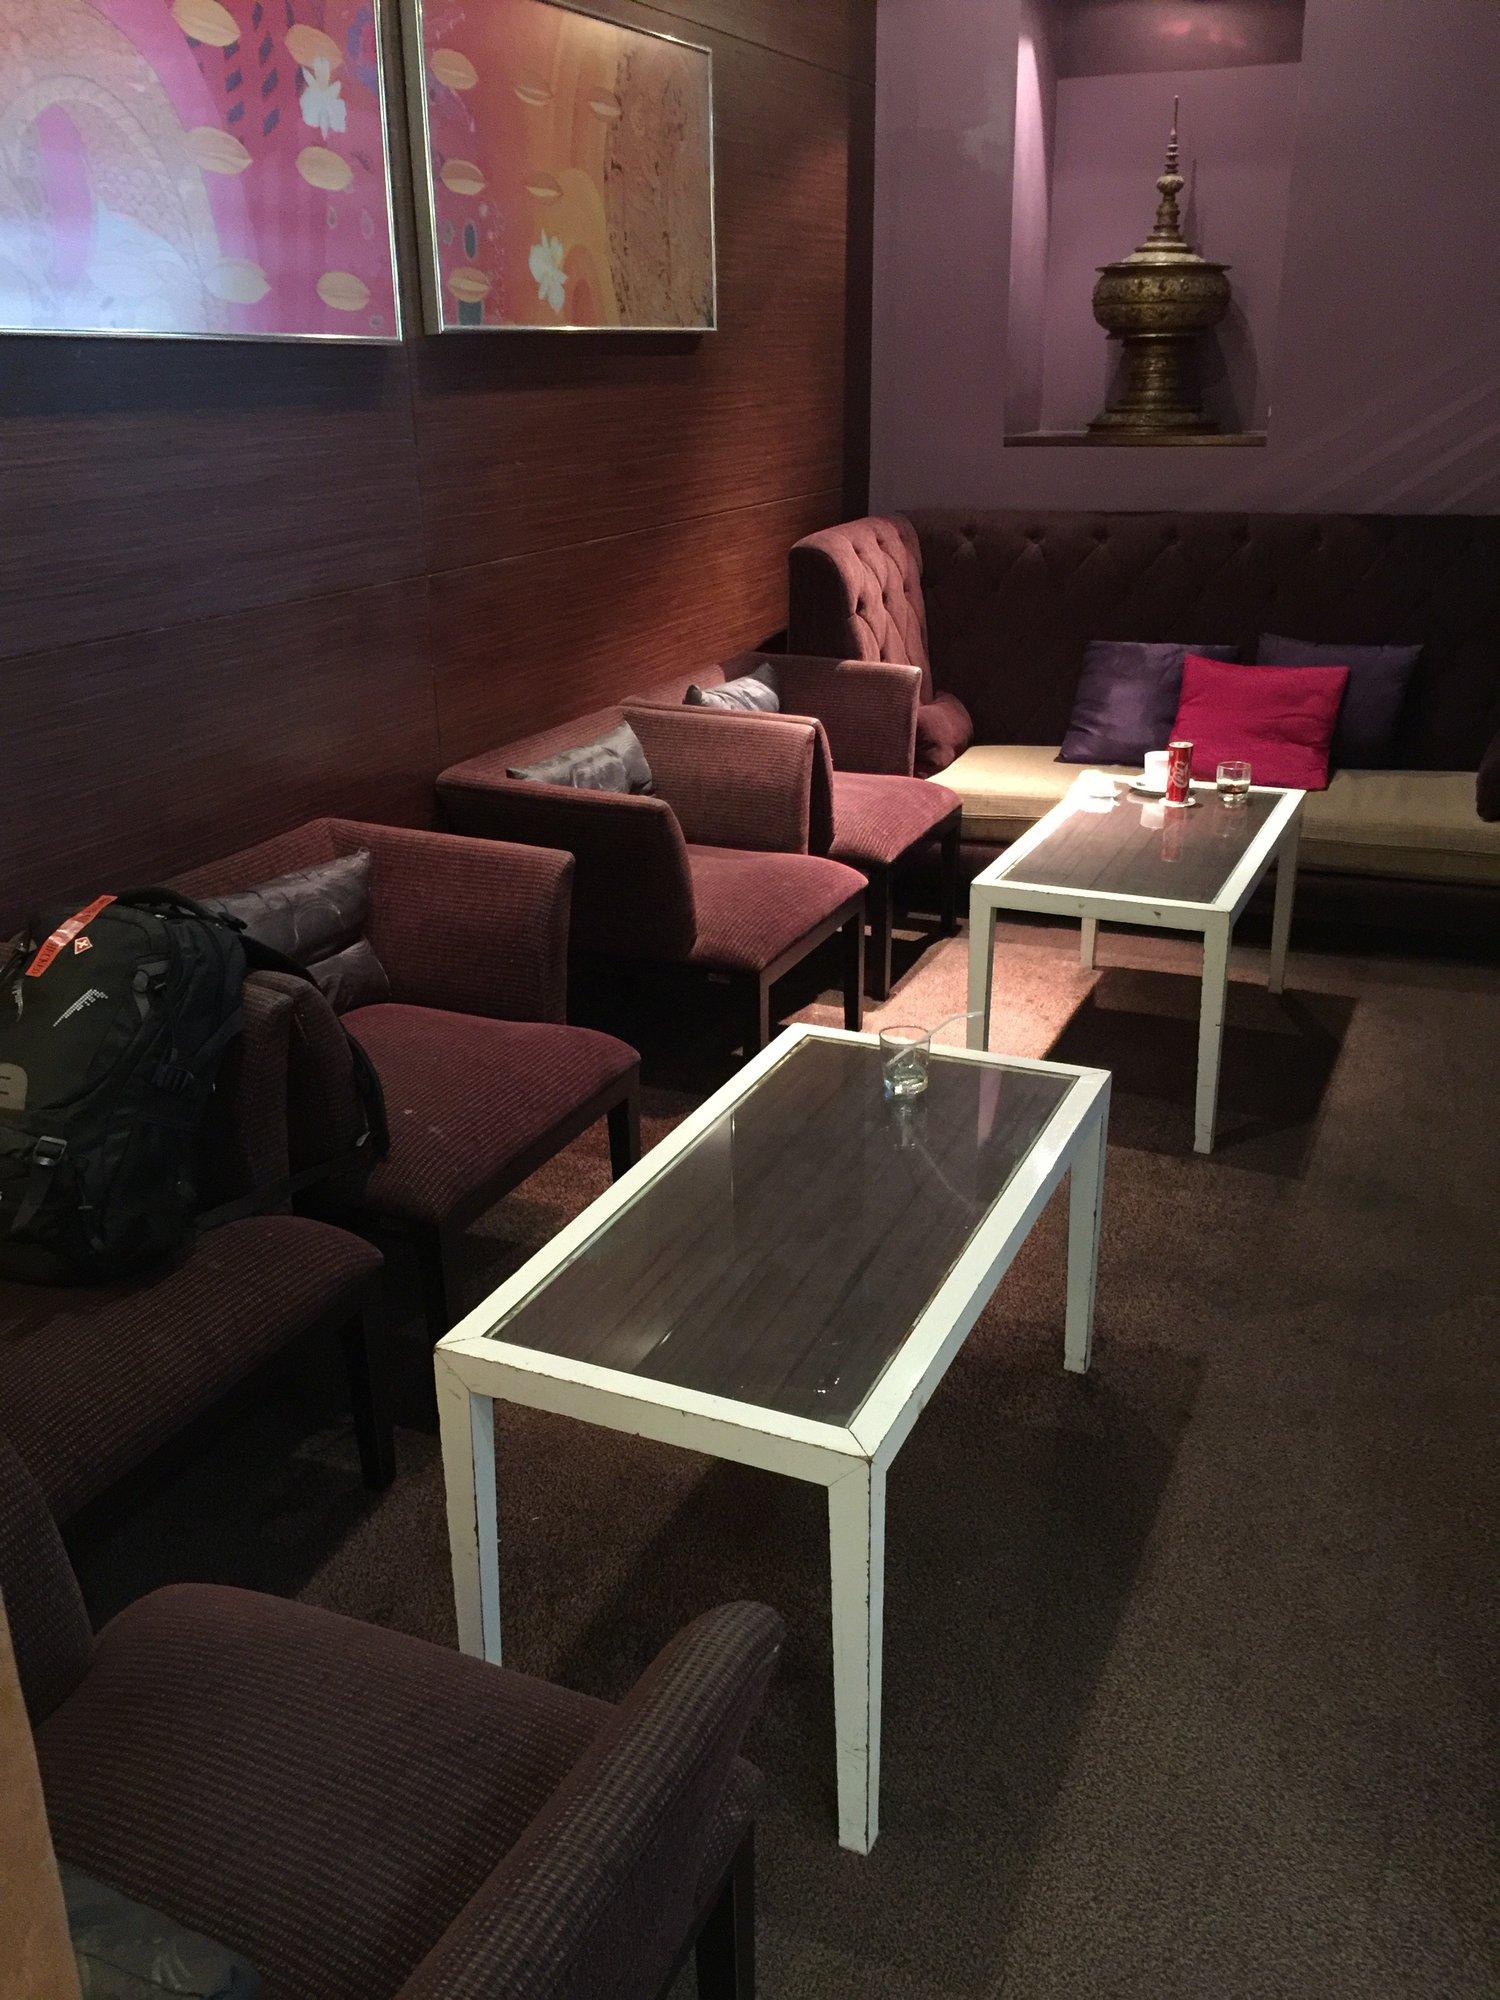 Thai Airways Royal Orchid Lounge image 19 of 22